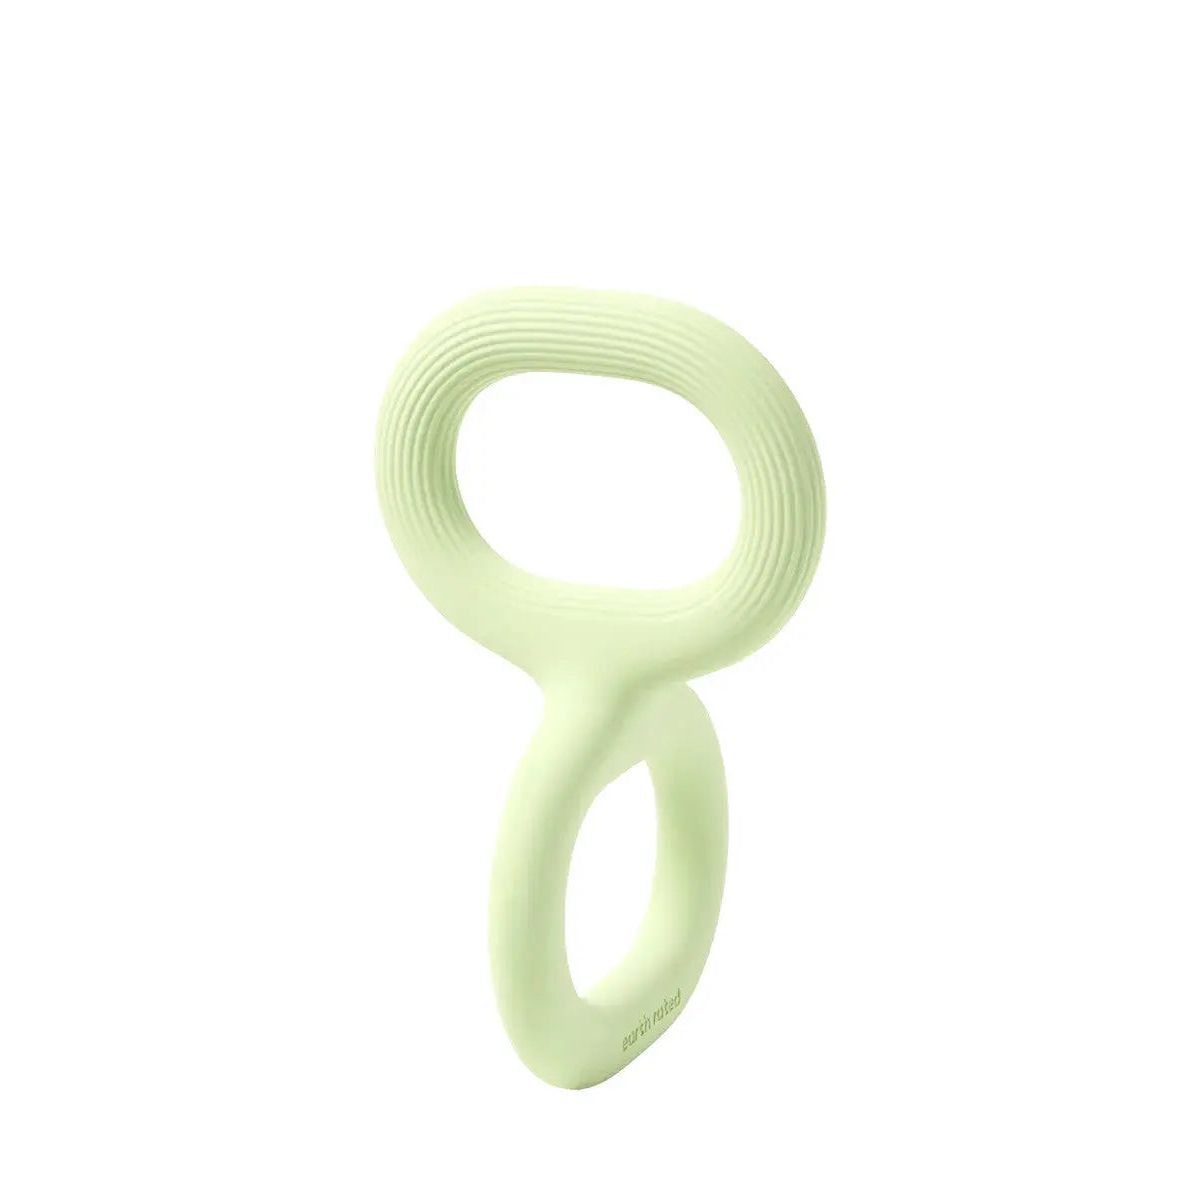 Earth Rated Dog Tug Toy Green Rubber Earth Rated